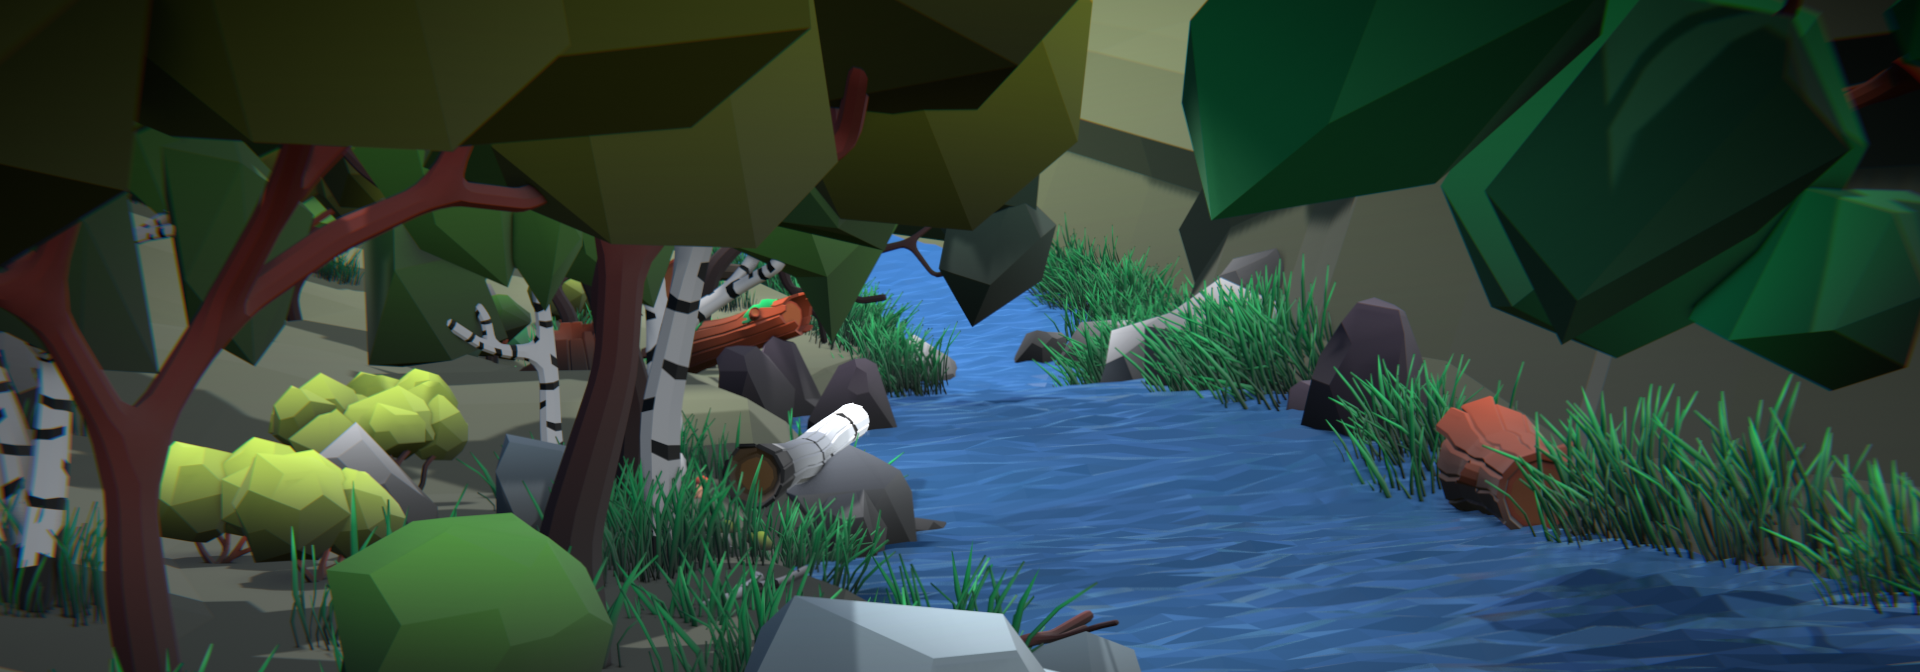 Enchanted Woodlands: Complete Low Poly Forest Collection